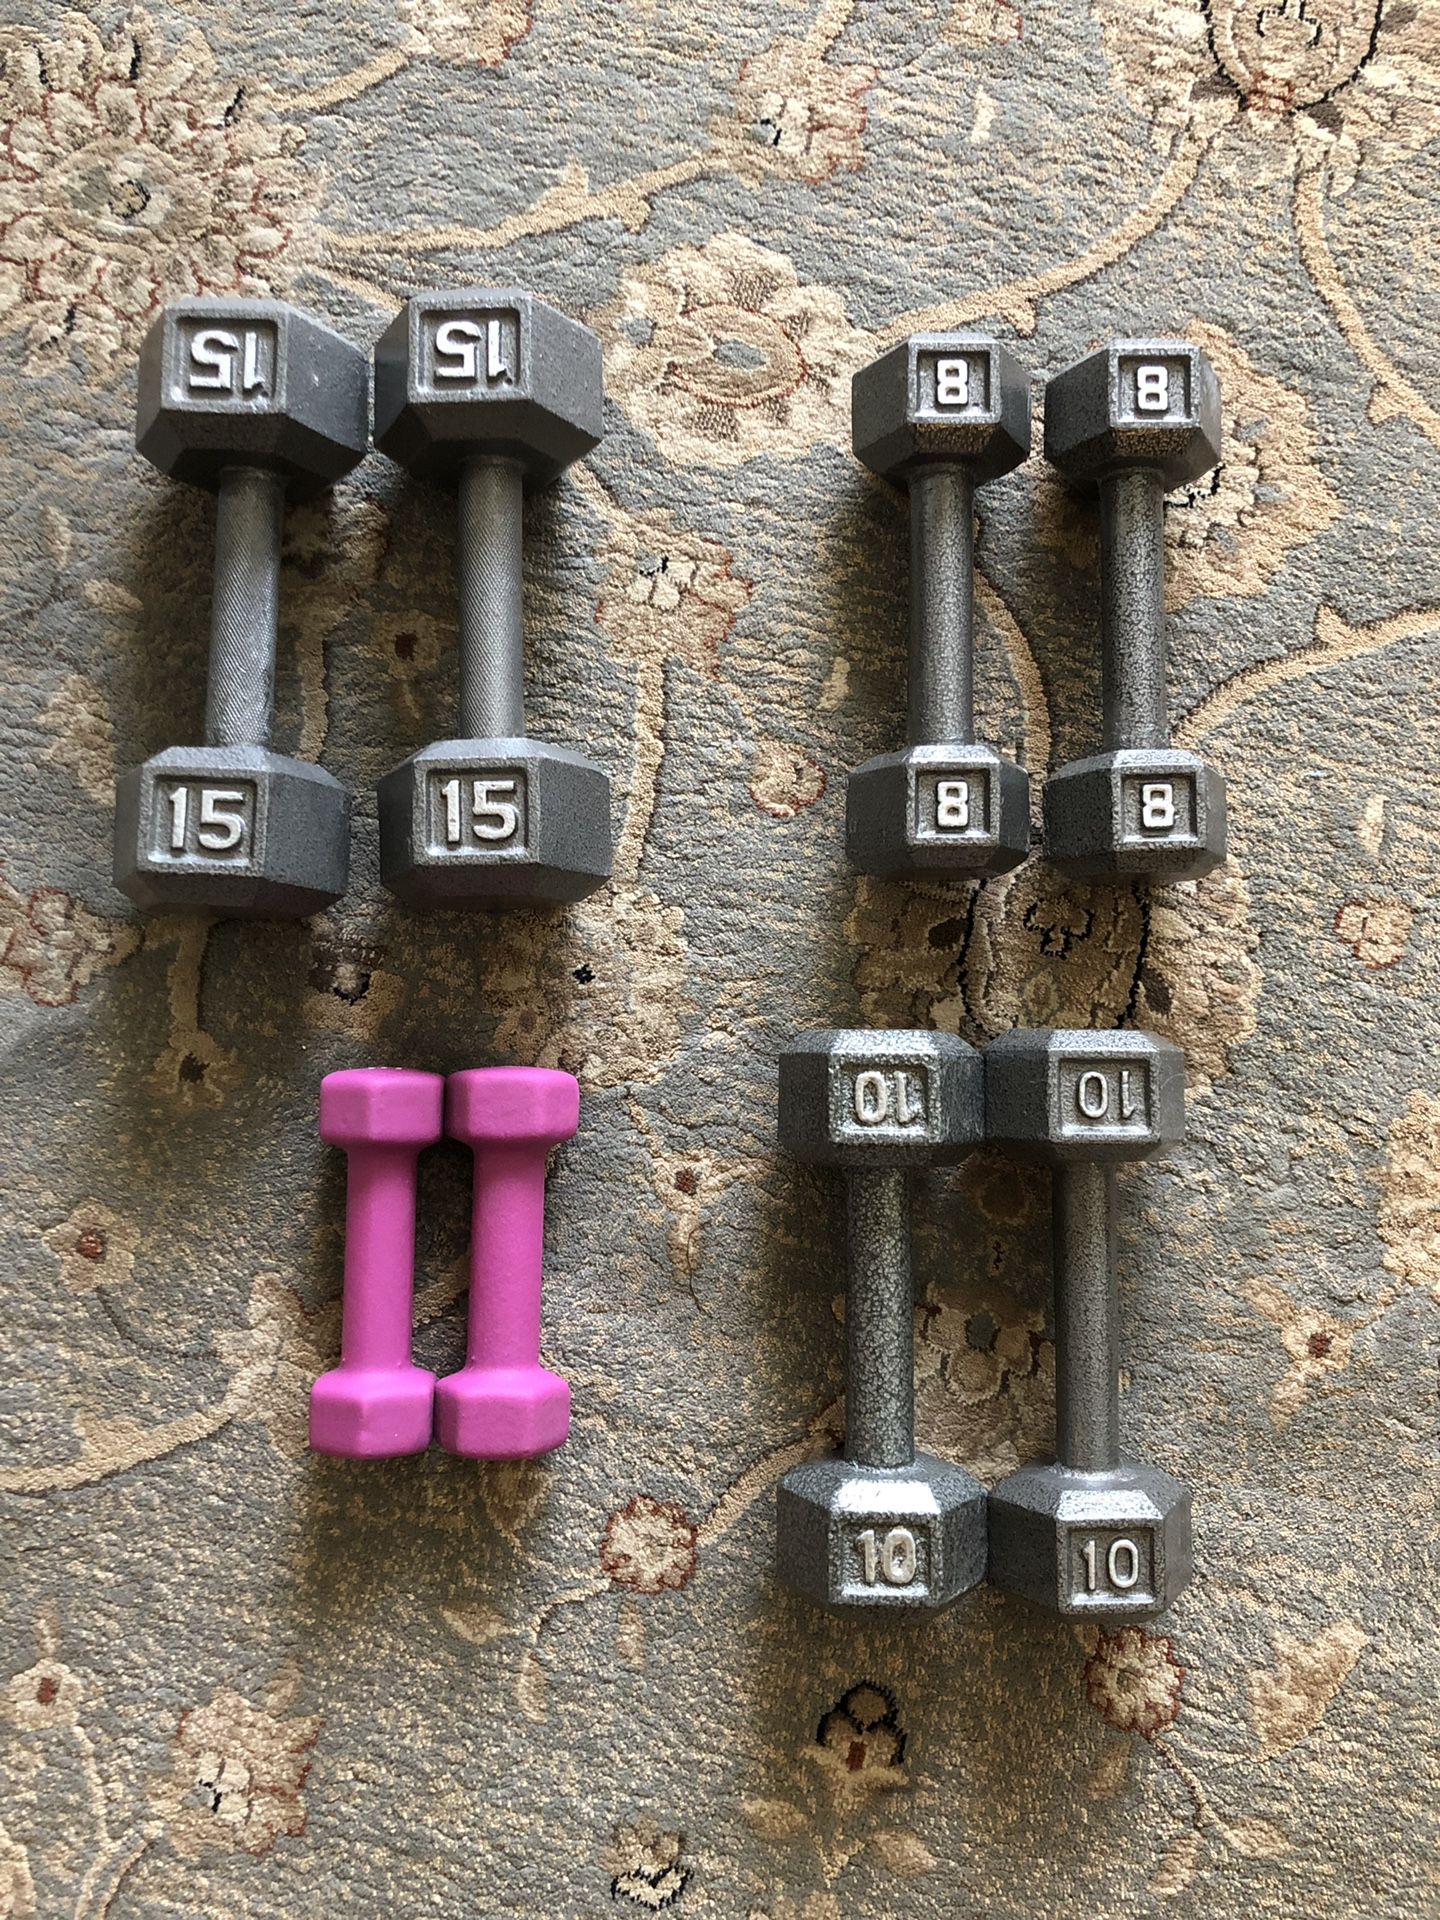 Workout weights, 15 lb weights, 10 lb weights, 8 lb weights, and 3 lb weights Dumbbells